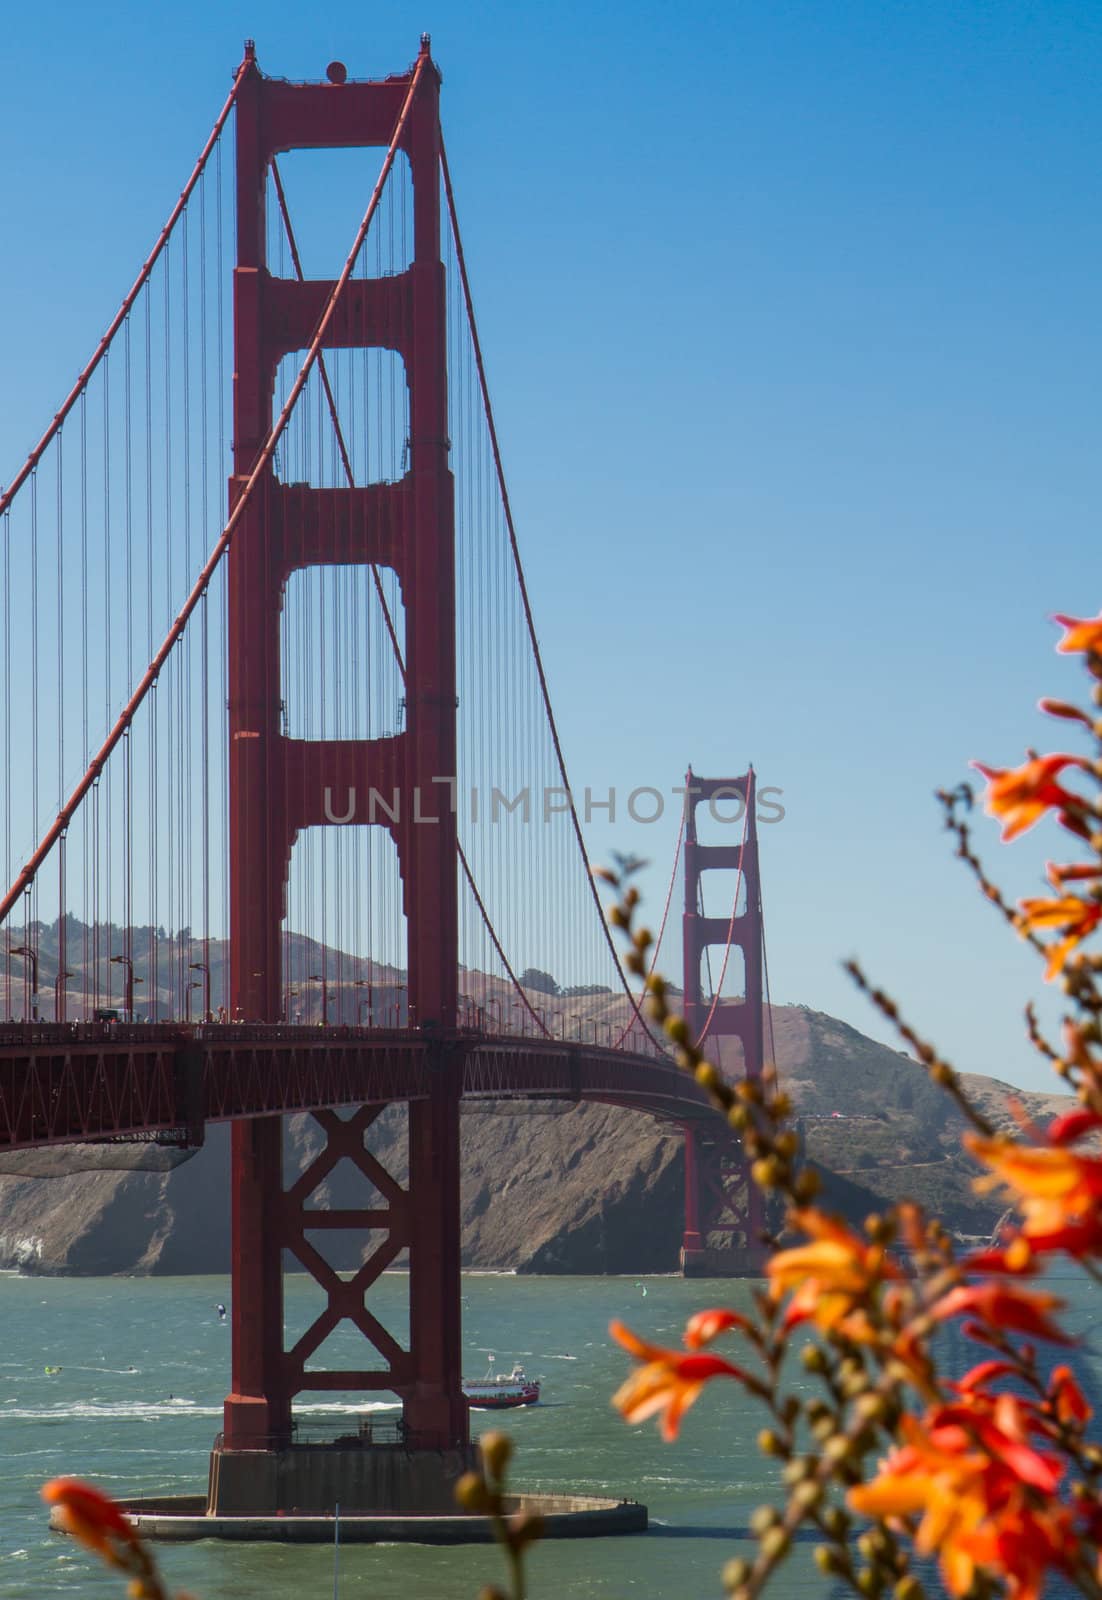 The Golden Gate Bridge is a suspension bridge spanning the Golden Gate, the opening of the San Francisco Bay into the Pacific Ocean. It is one of the most internationally recognized symbols of San Francisco, California.